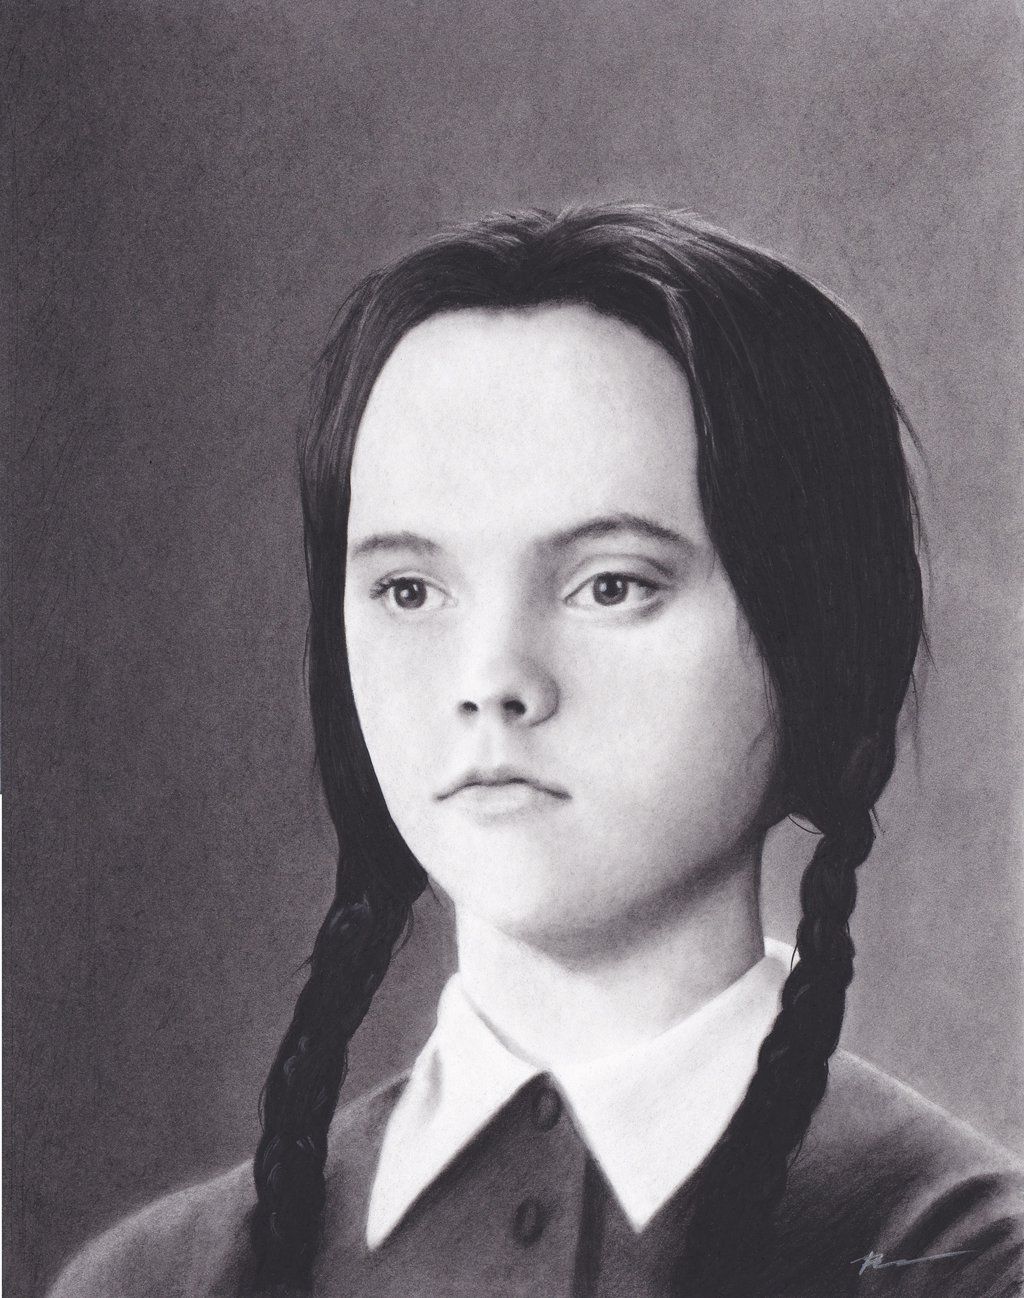 Wednesday Addams Wallpapers - Wallpaper Cave